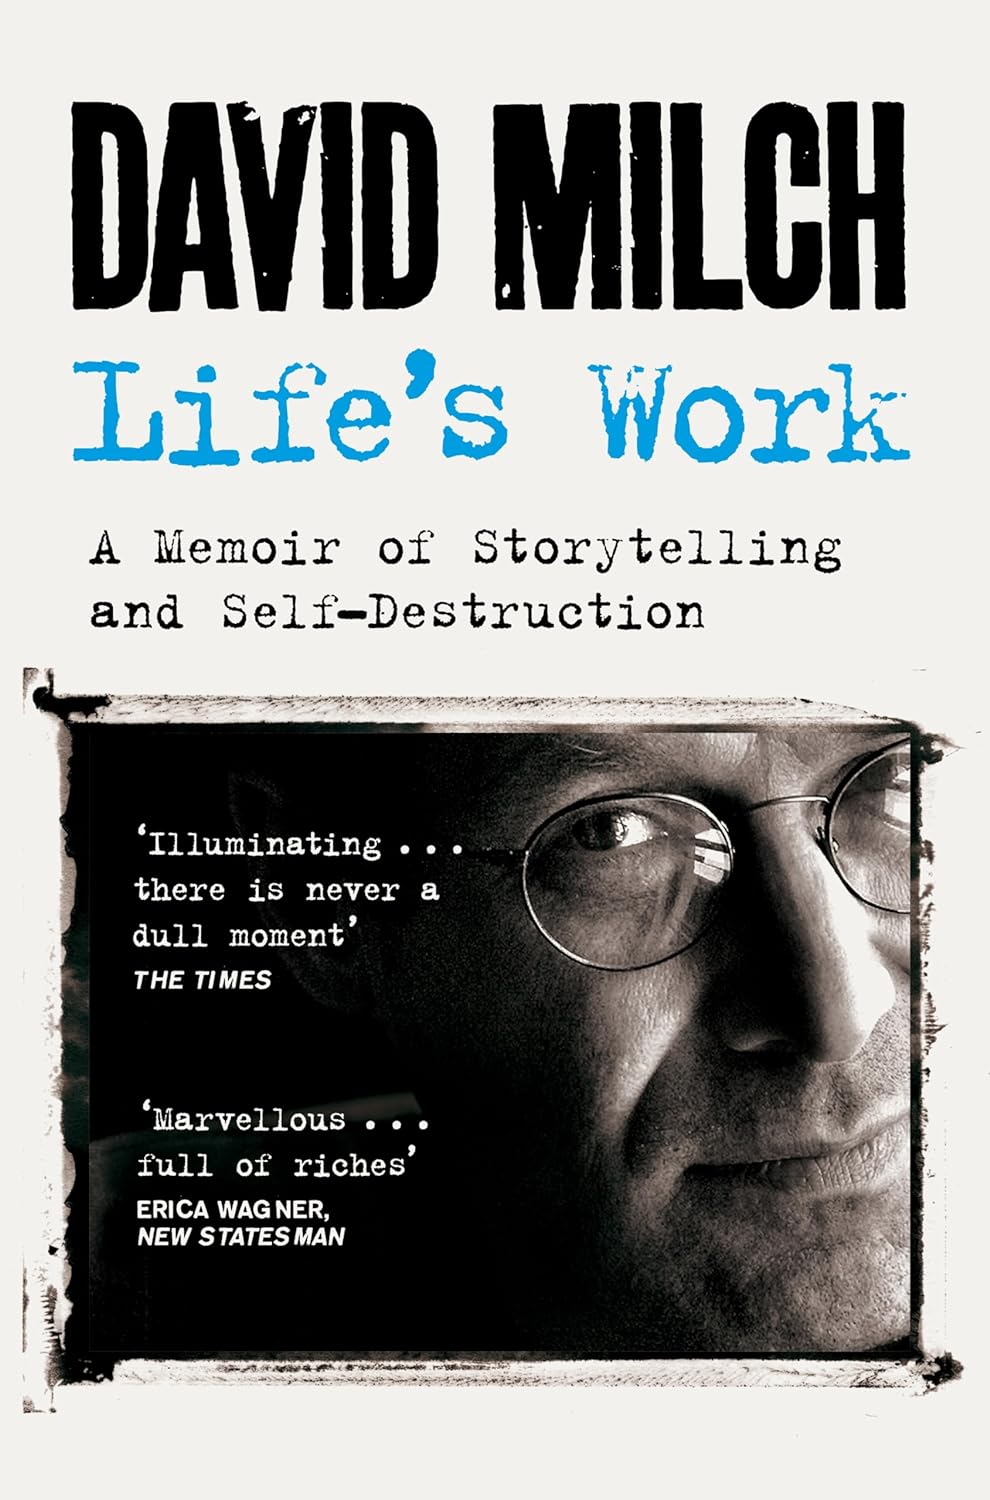 David_milch_Lifes_work_book_cover